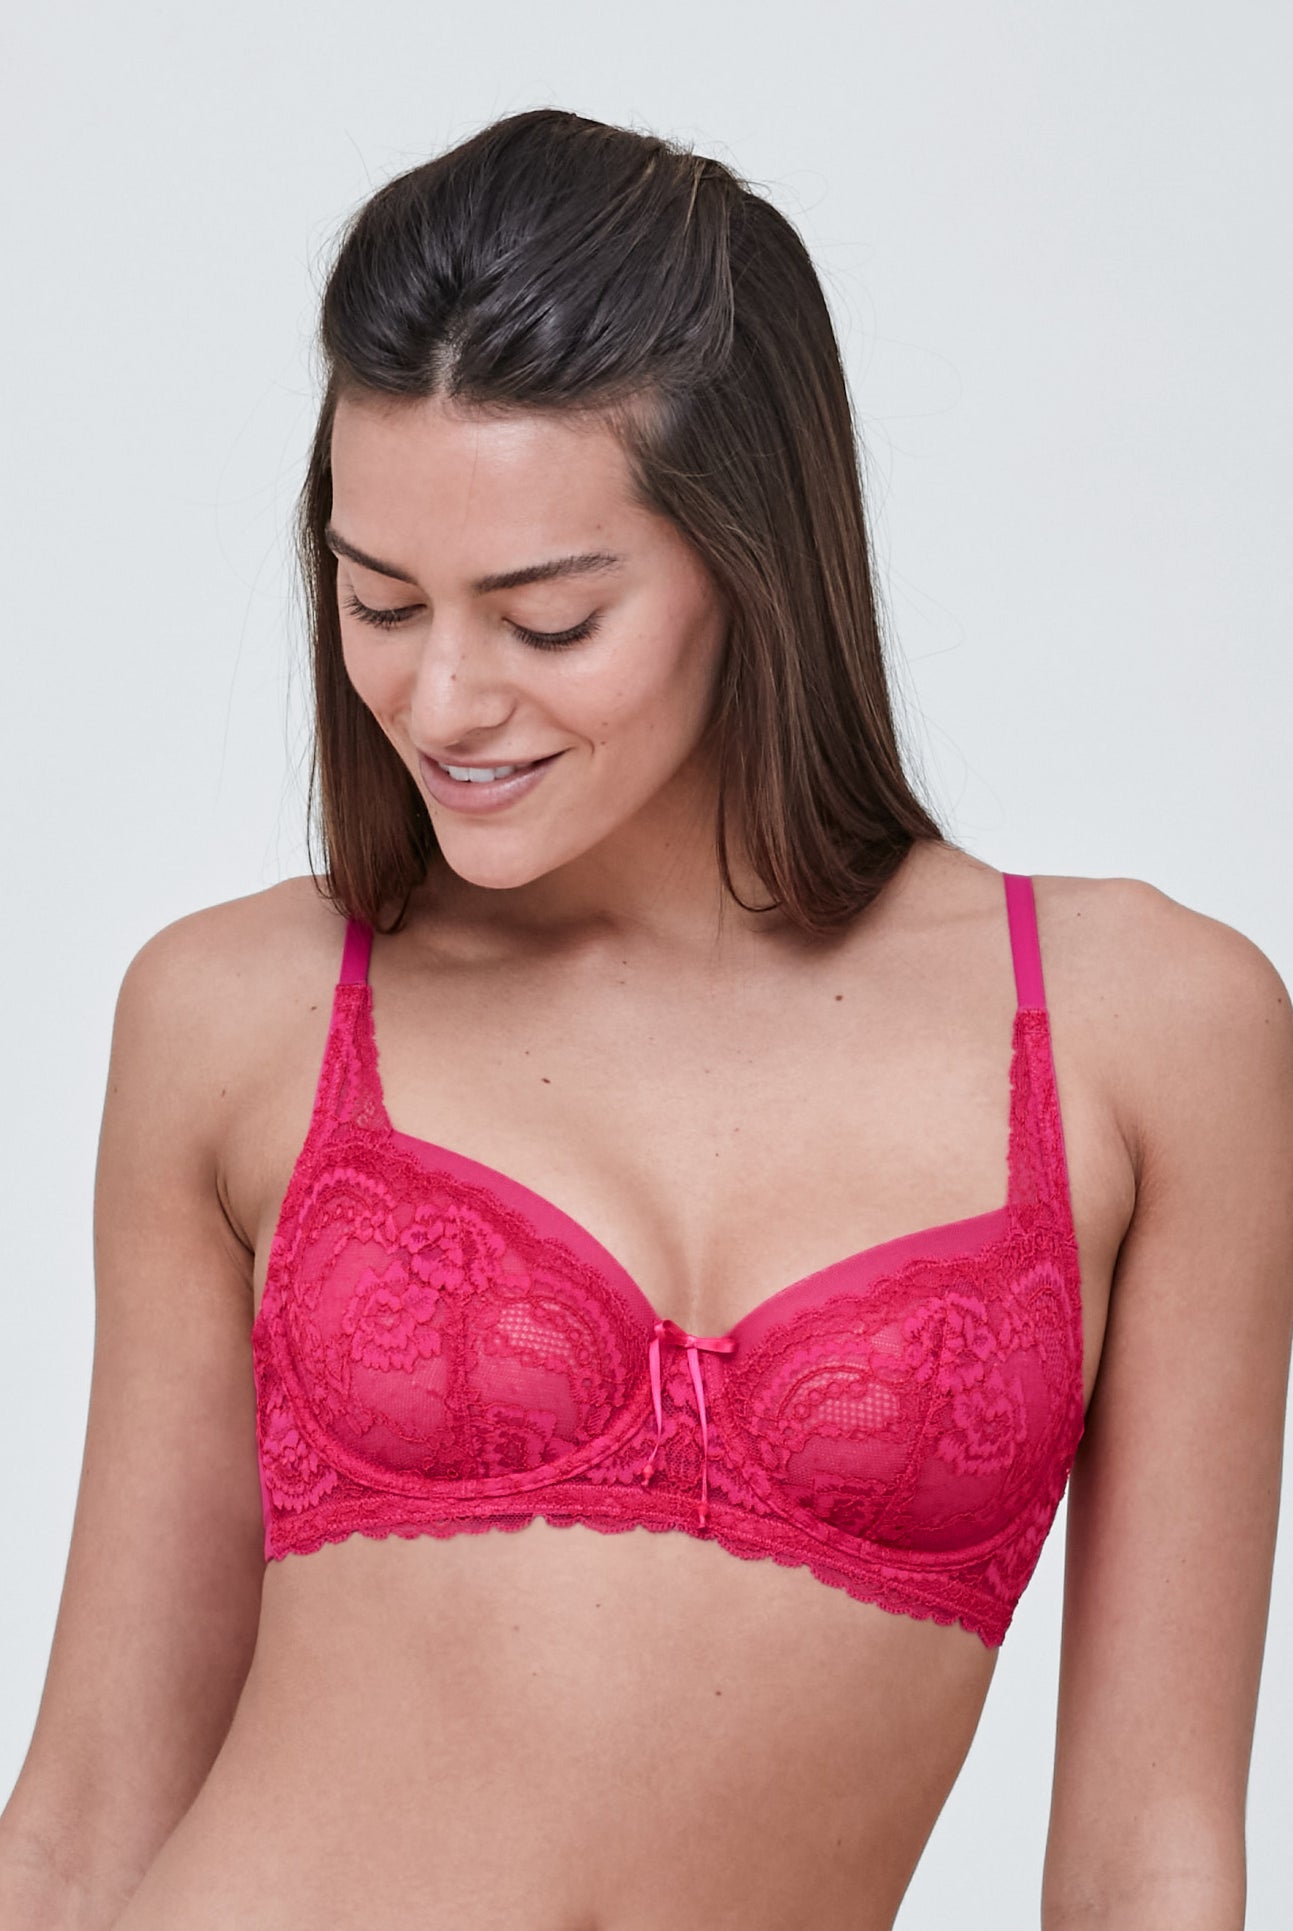 Women's Bras  Push-Up, Strapless, & More - Skarlett Blue – Tagged Lace